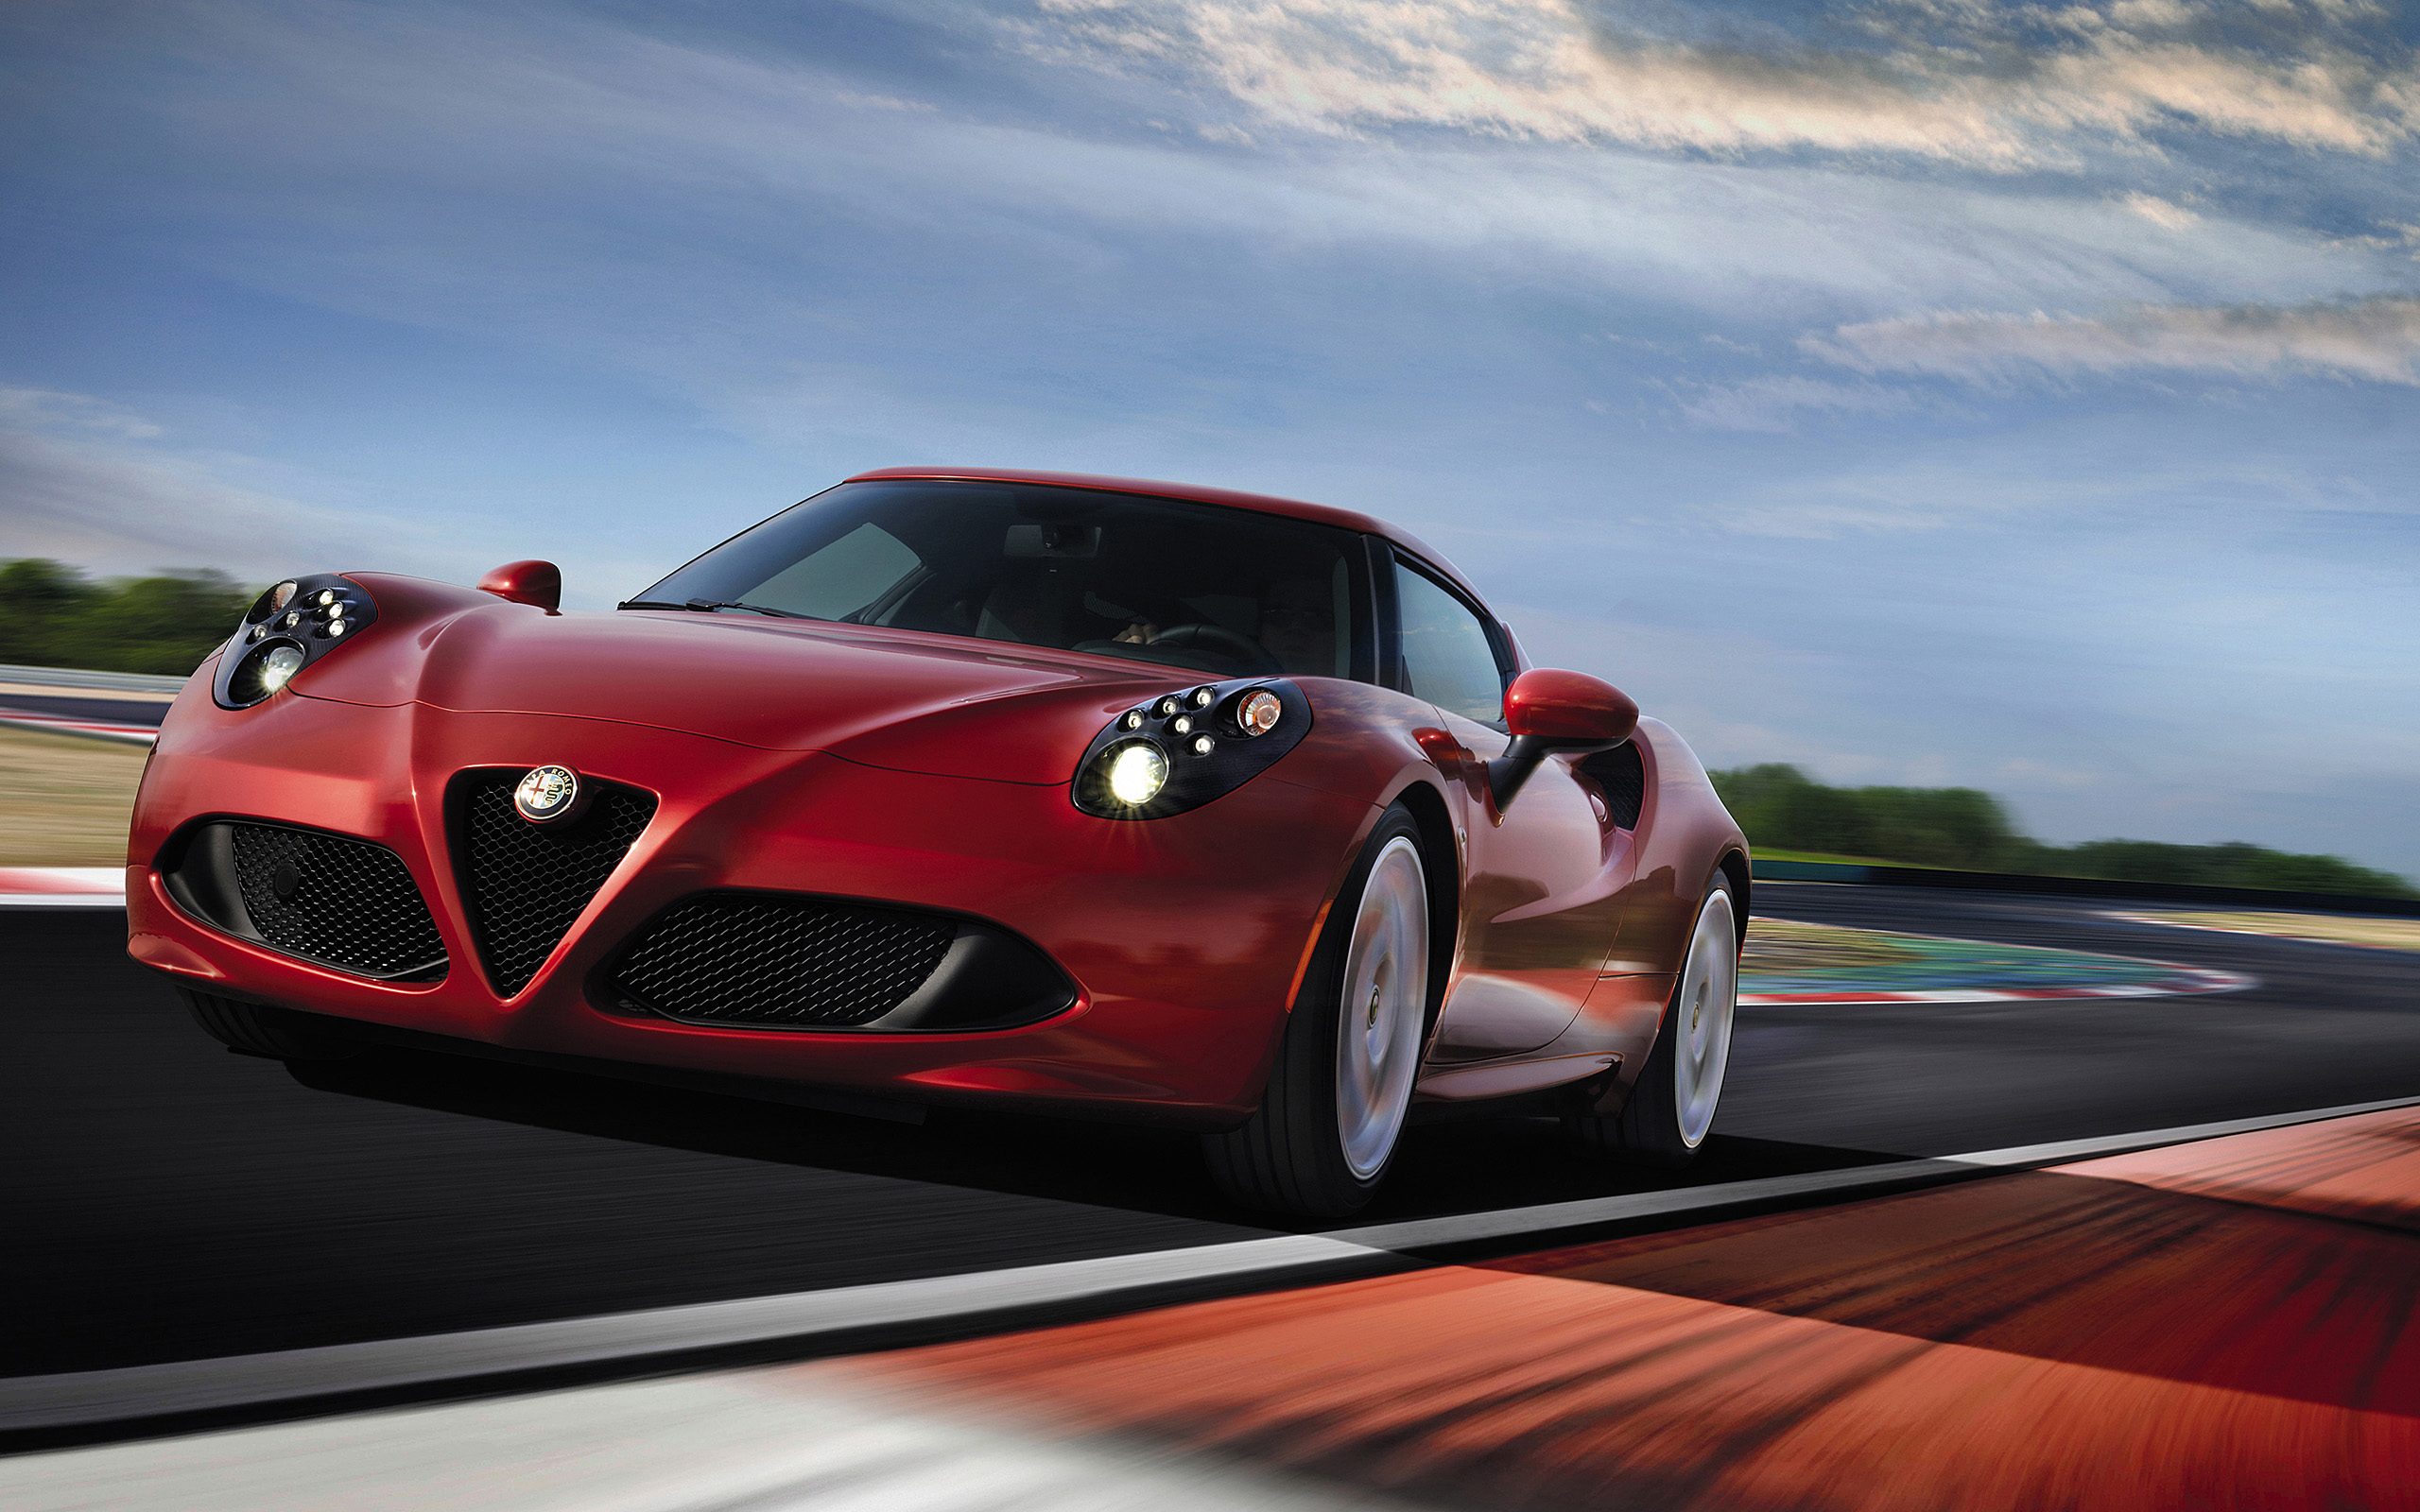 80+ Alfa Romeo 4C HD Wallpapers and Backgrounds